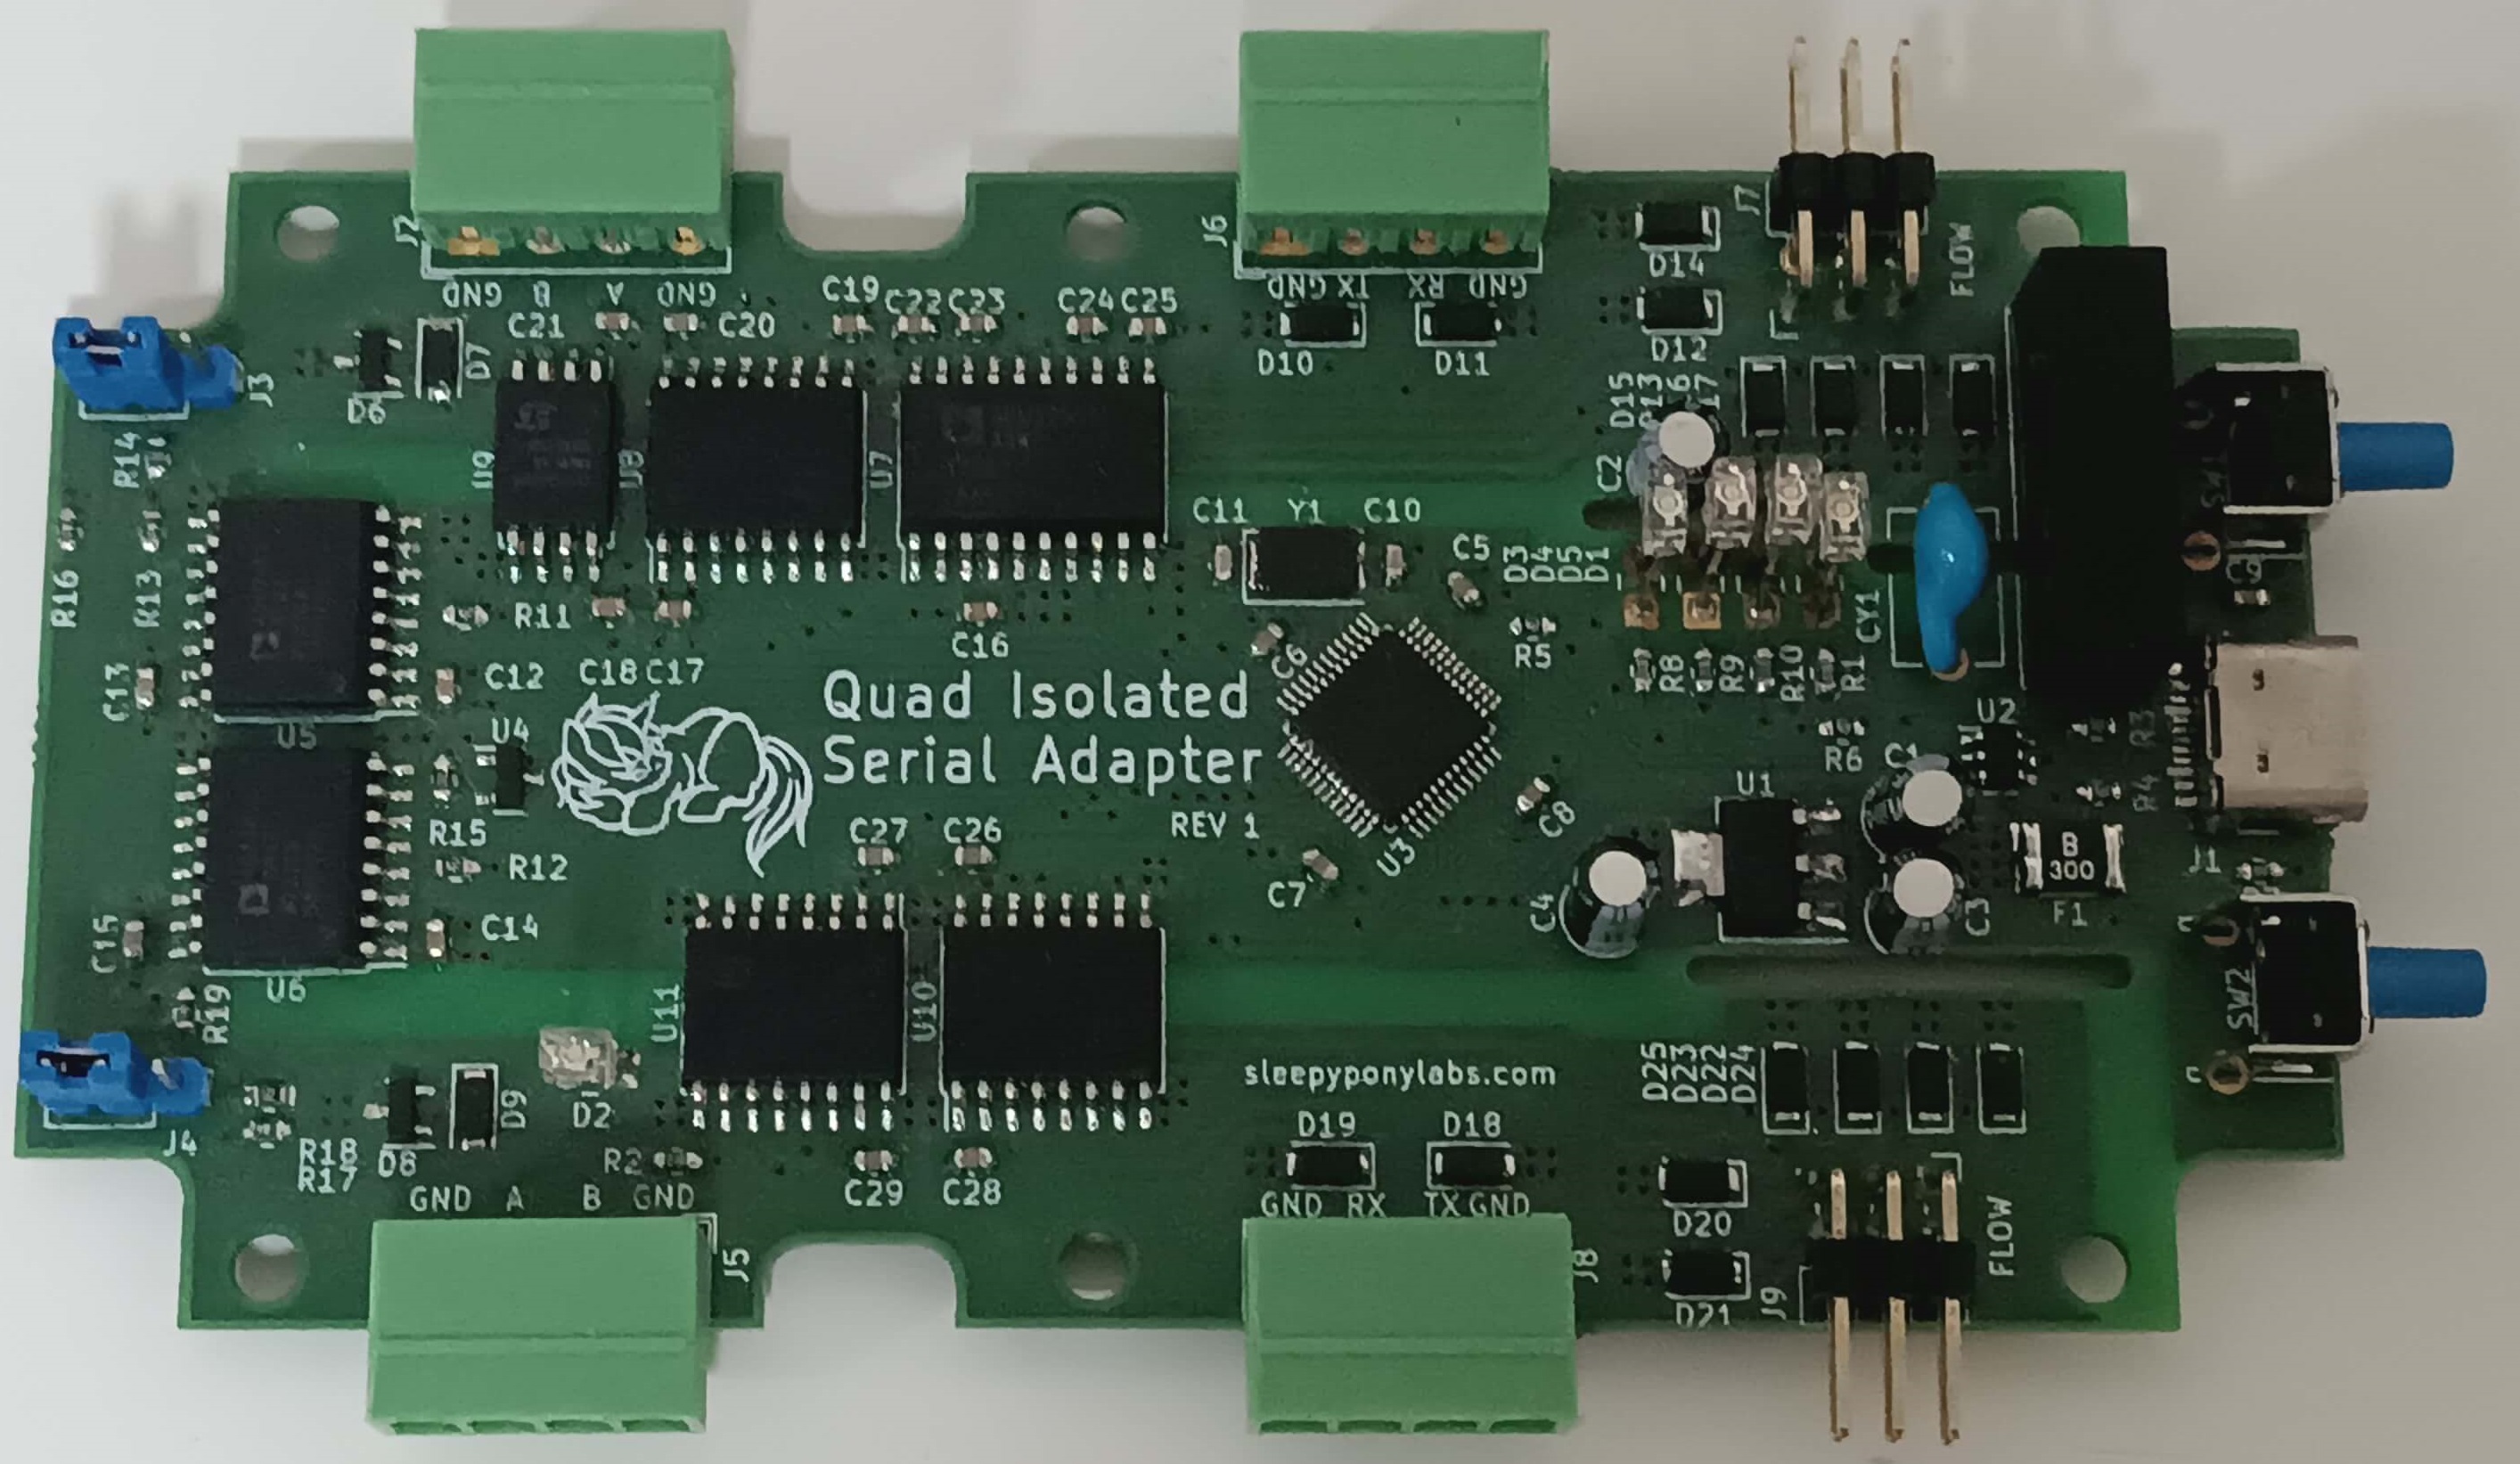 Quad Isolated Serial Adapter revision 1